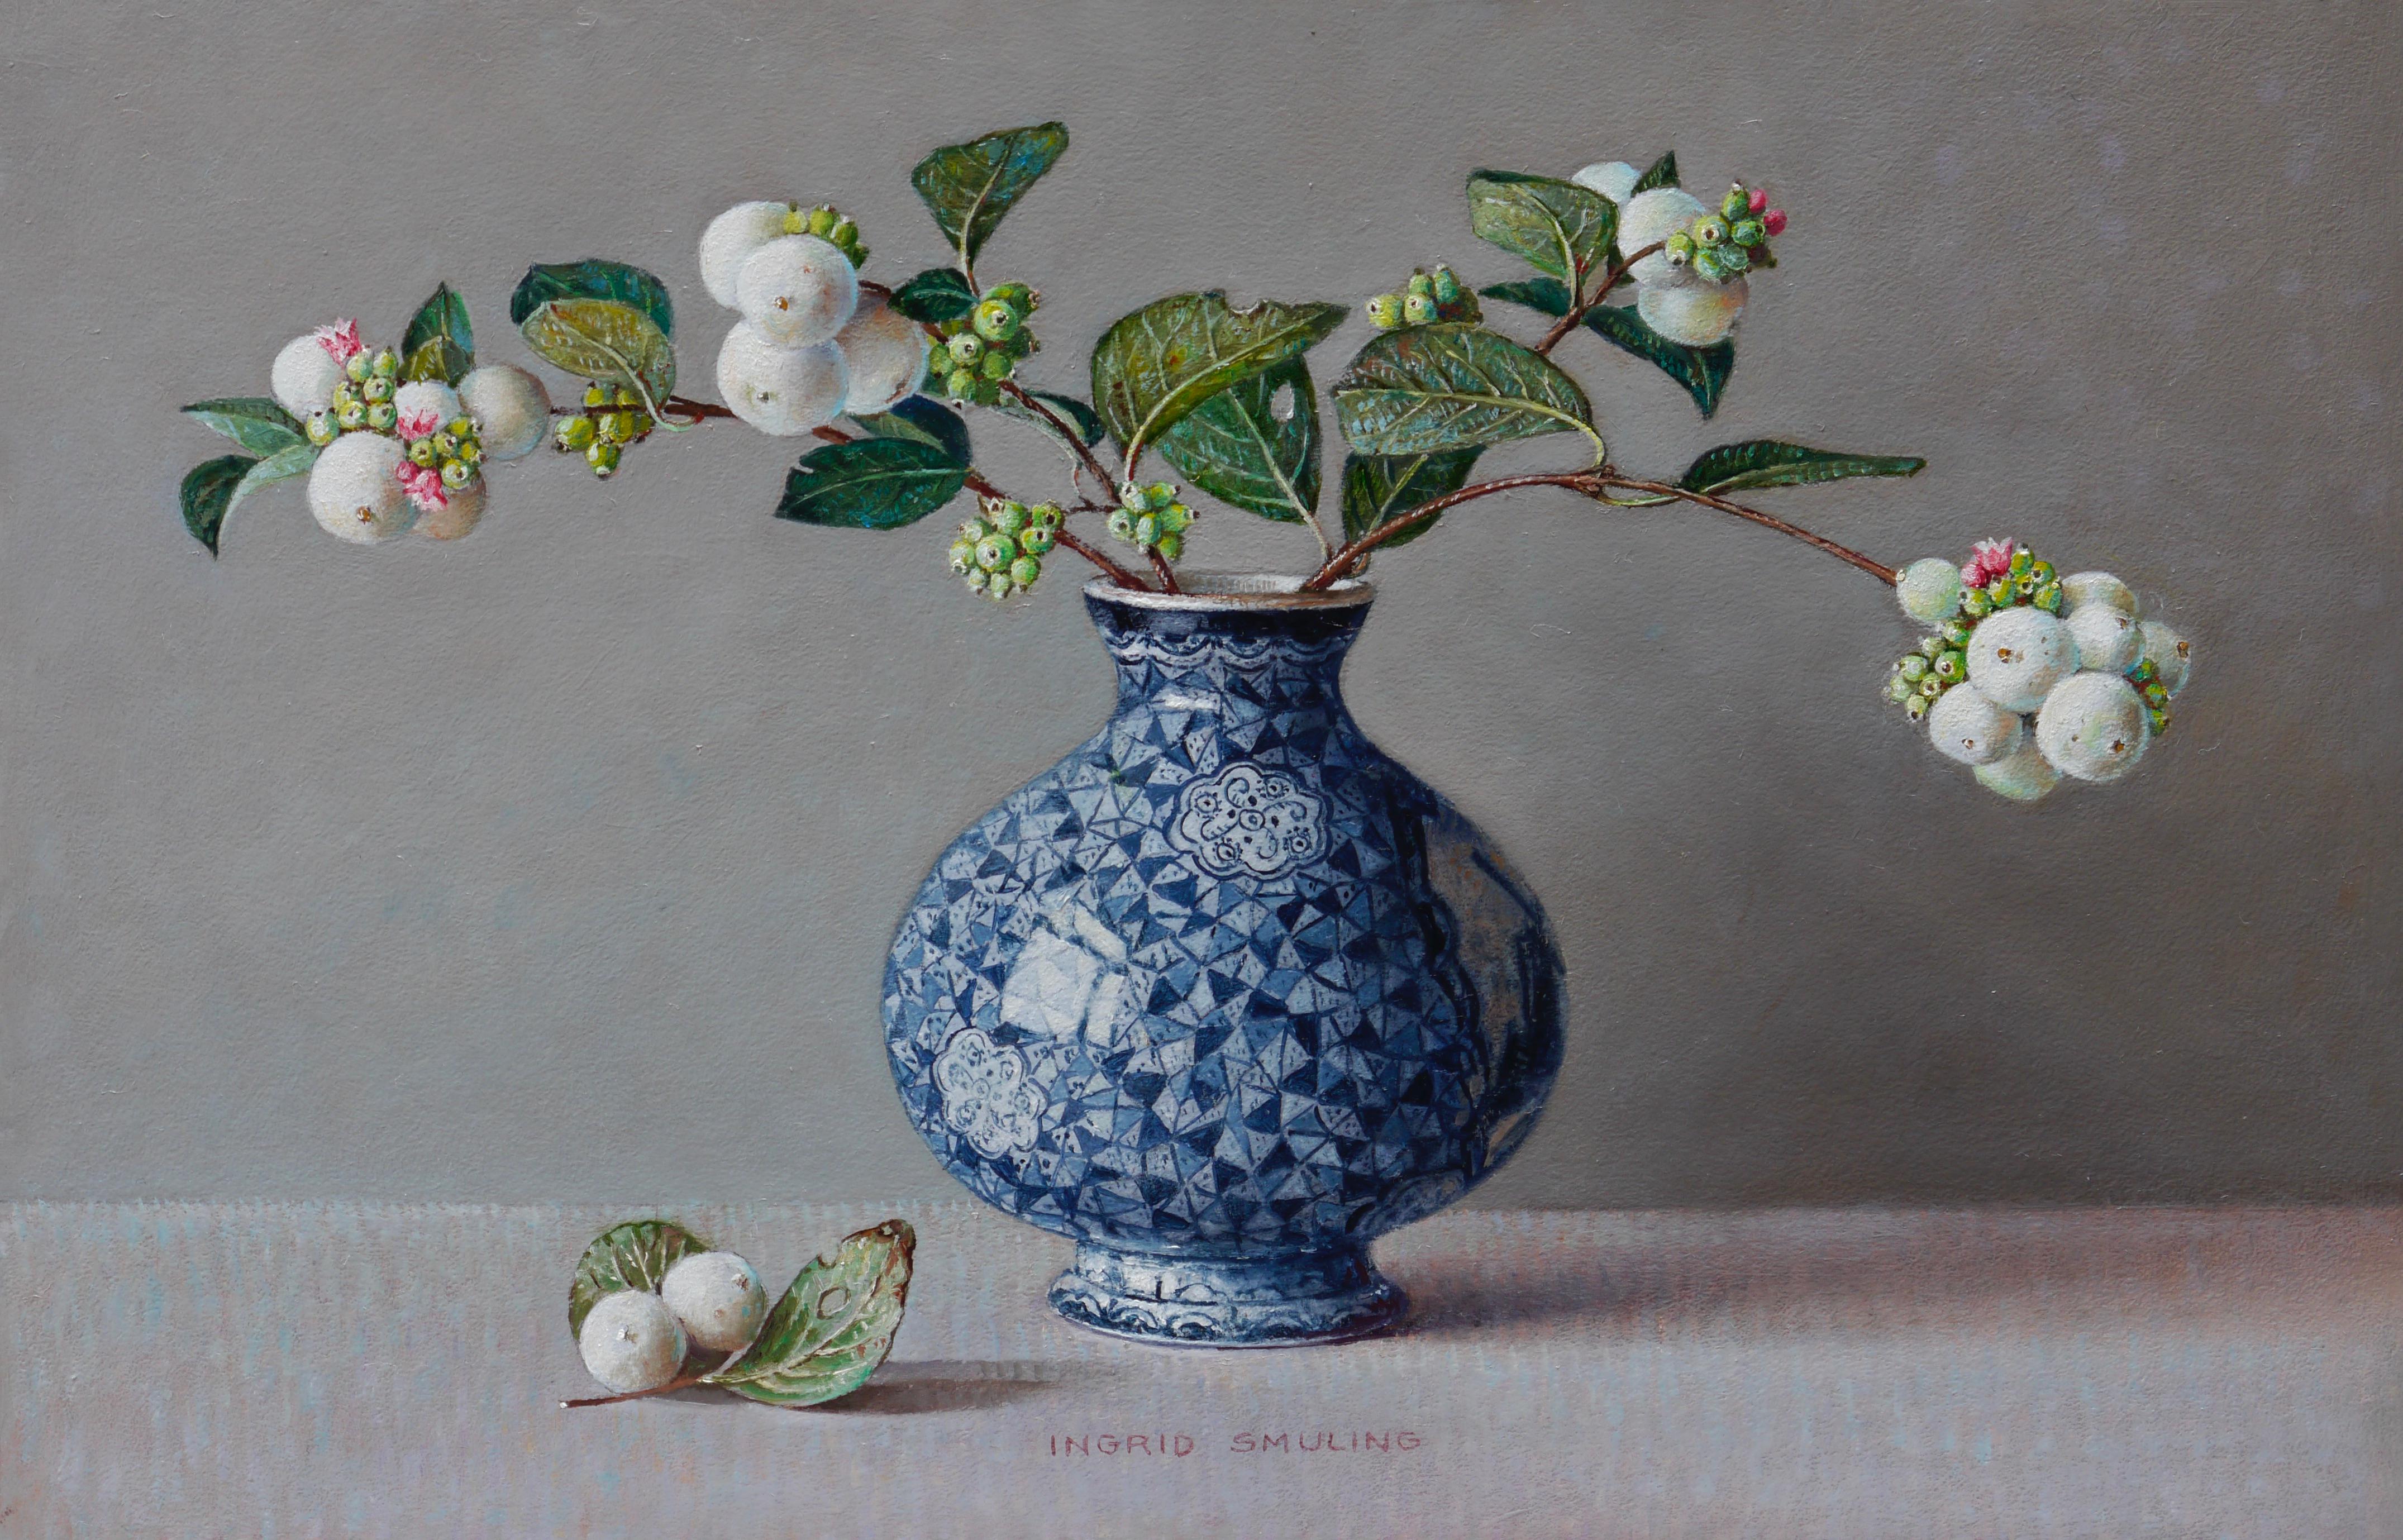 Ingrid Smuling Figurative Painting - Snowberries in a Vase - 21st Century Contemporary Still-Life Painting 